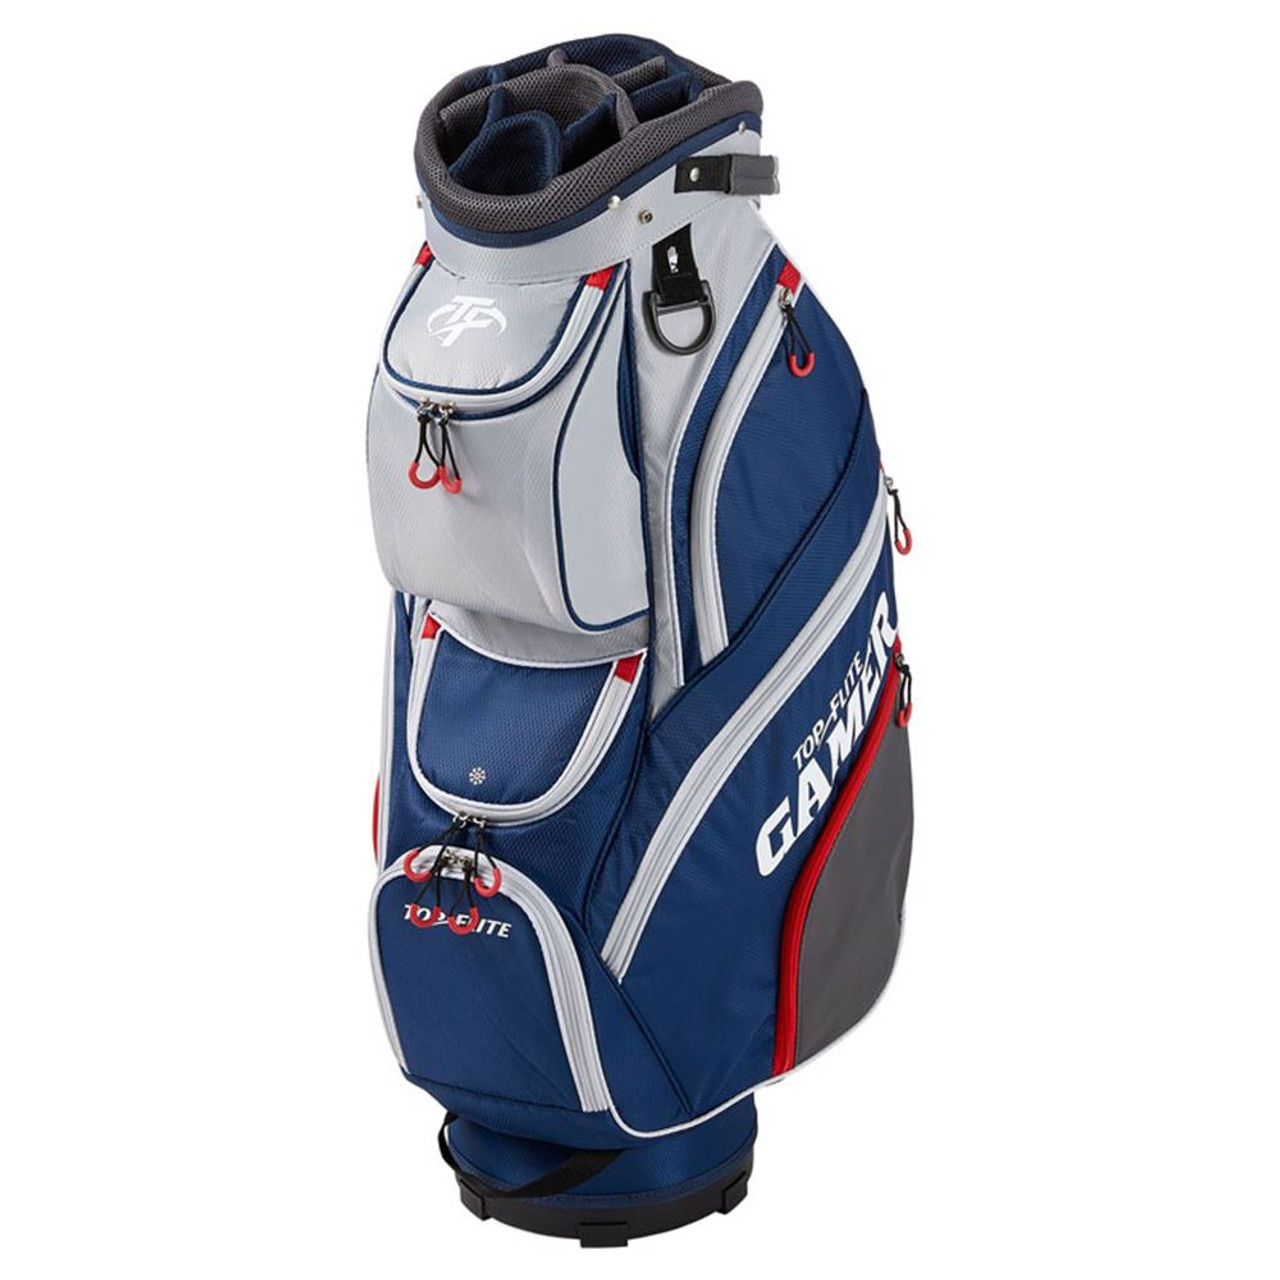 TaylorMade Select Plus Lightweight Golf Cart Bag from american golf